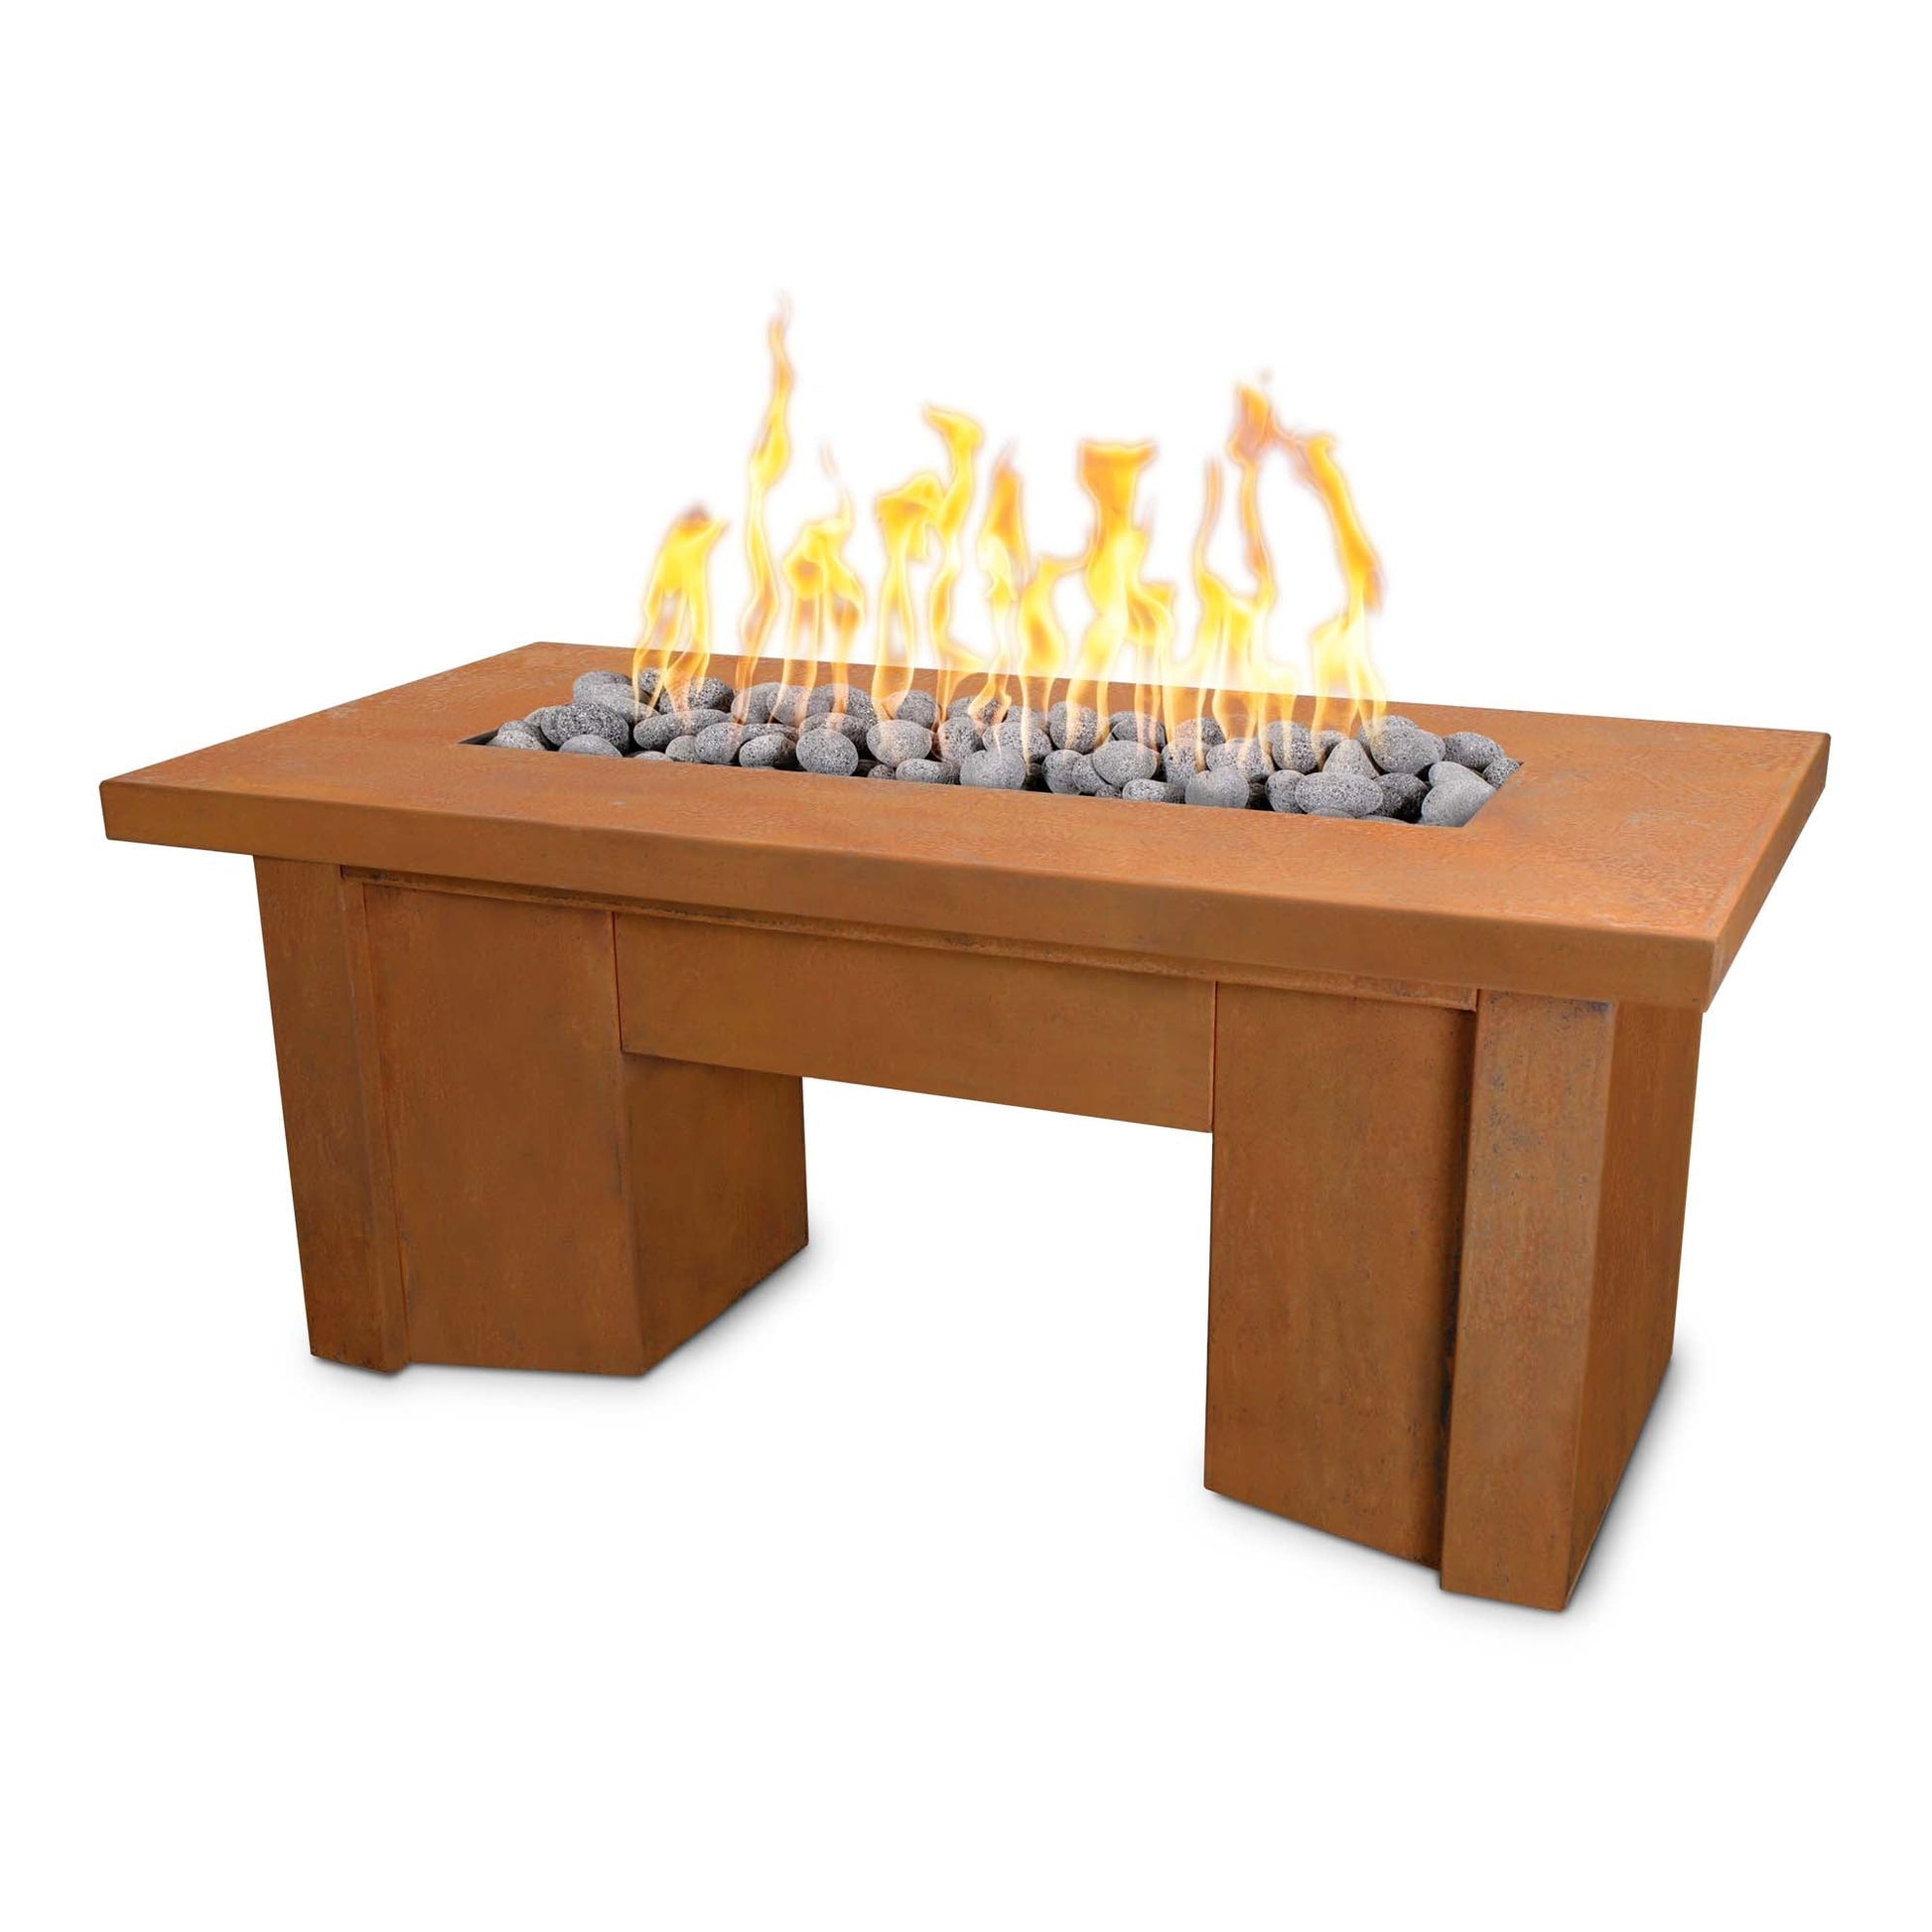 The Outdoor Plus Rectangular Alameda 60" Corten Steel Natural Gas Fire Pit with Match Lit with Flame Sense Ignition